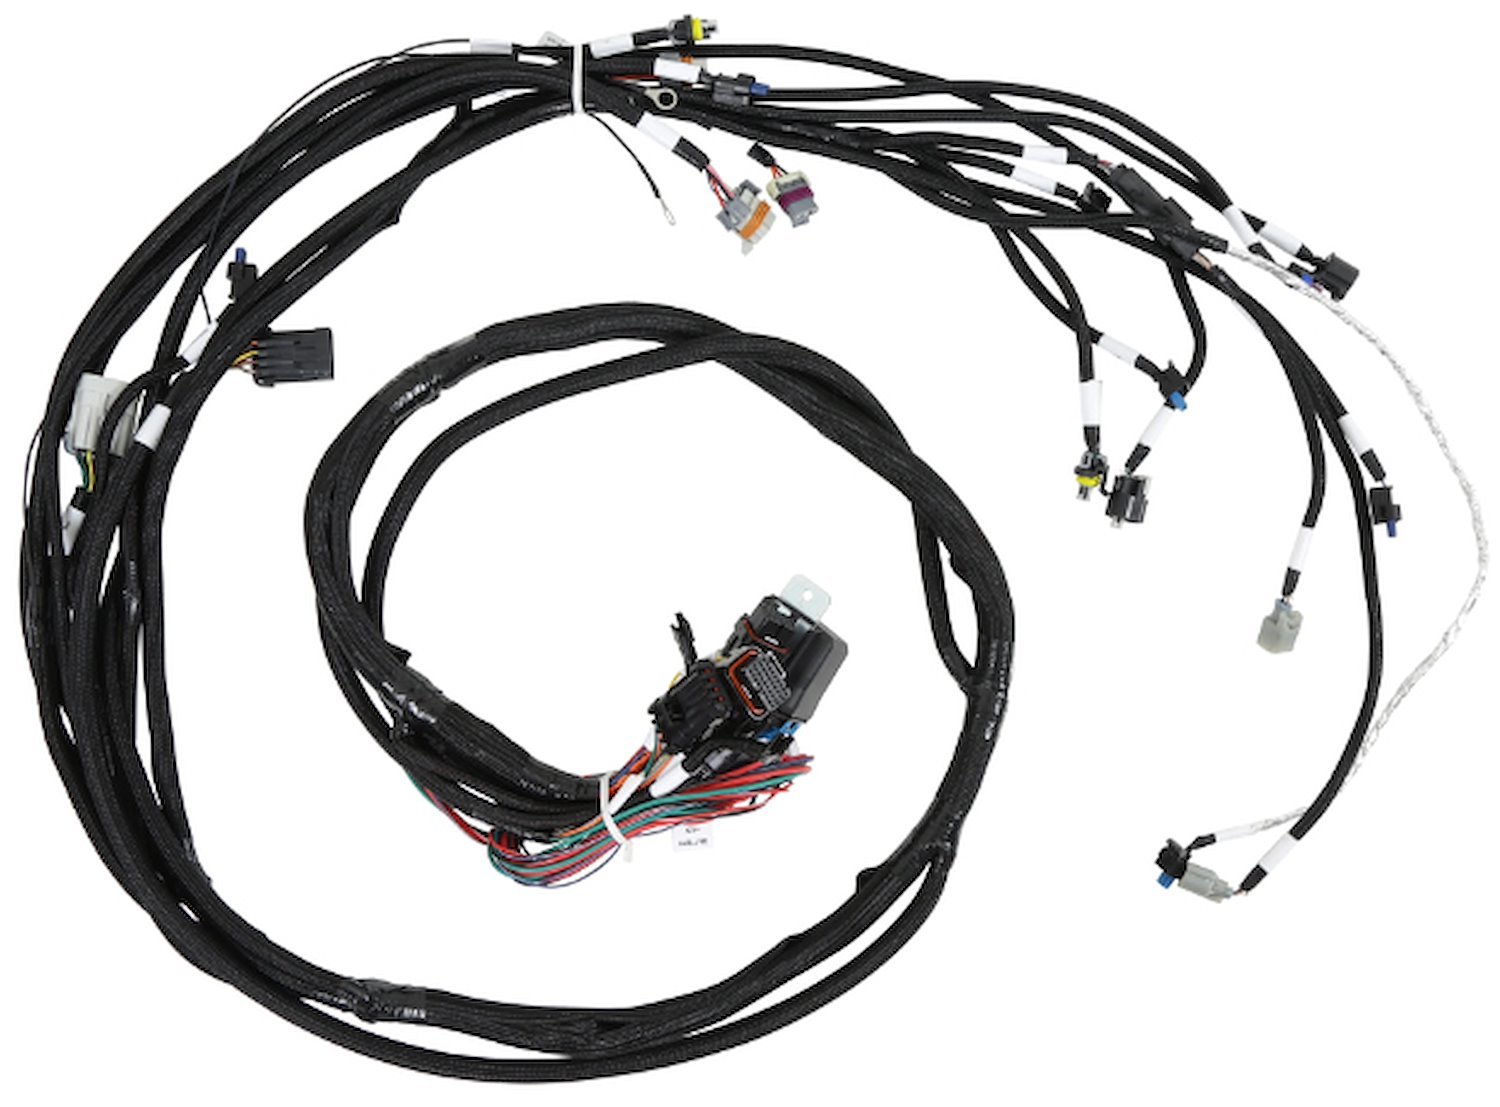 558-141 Main Harness for Ford 7.3L Godzilla Engines w/ IGN1A Smart Coils